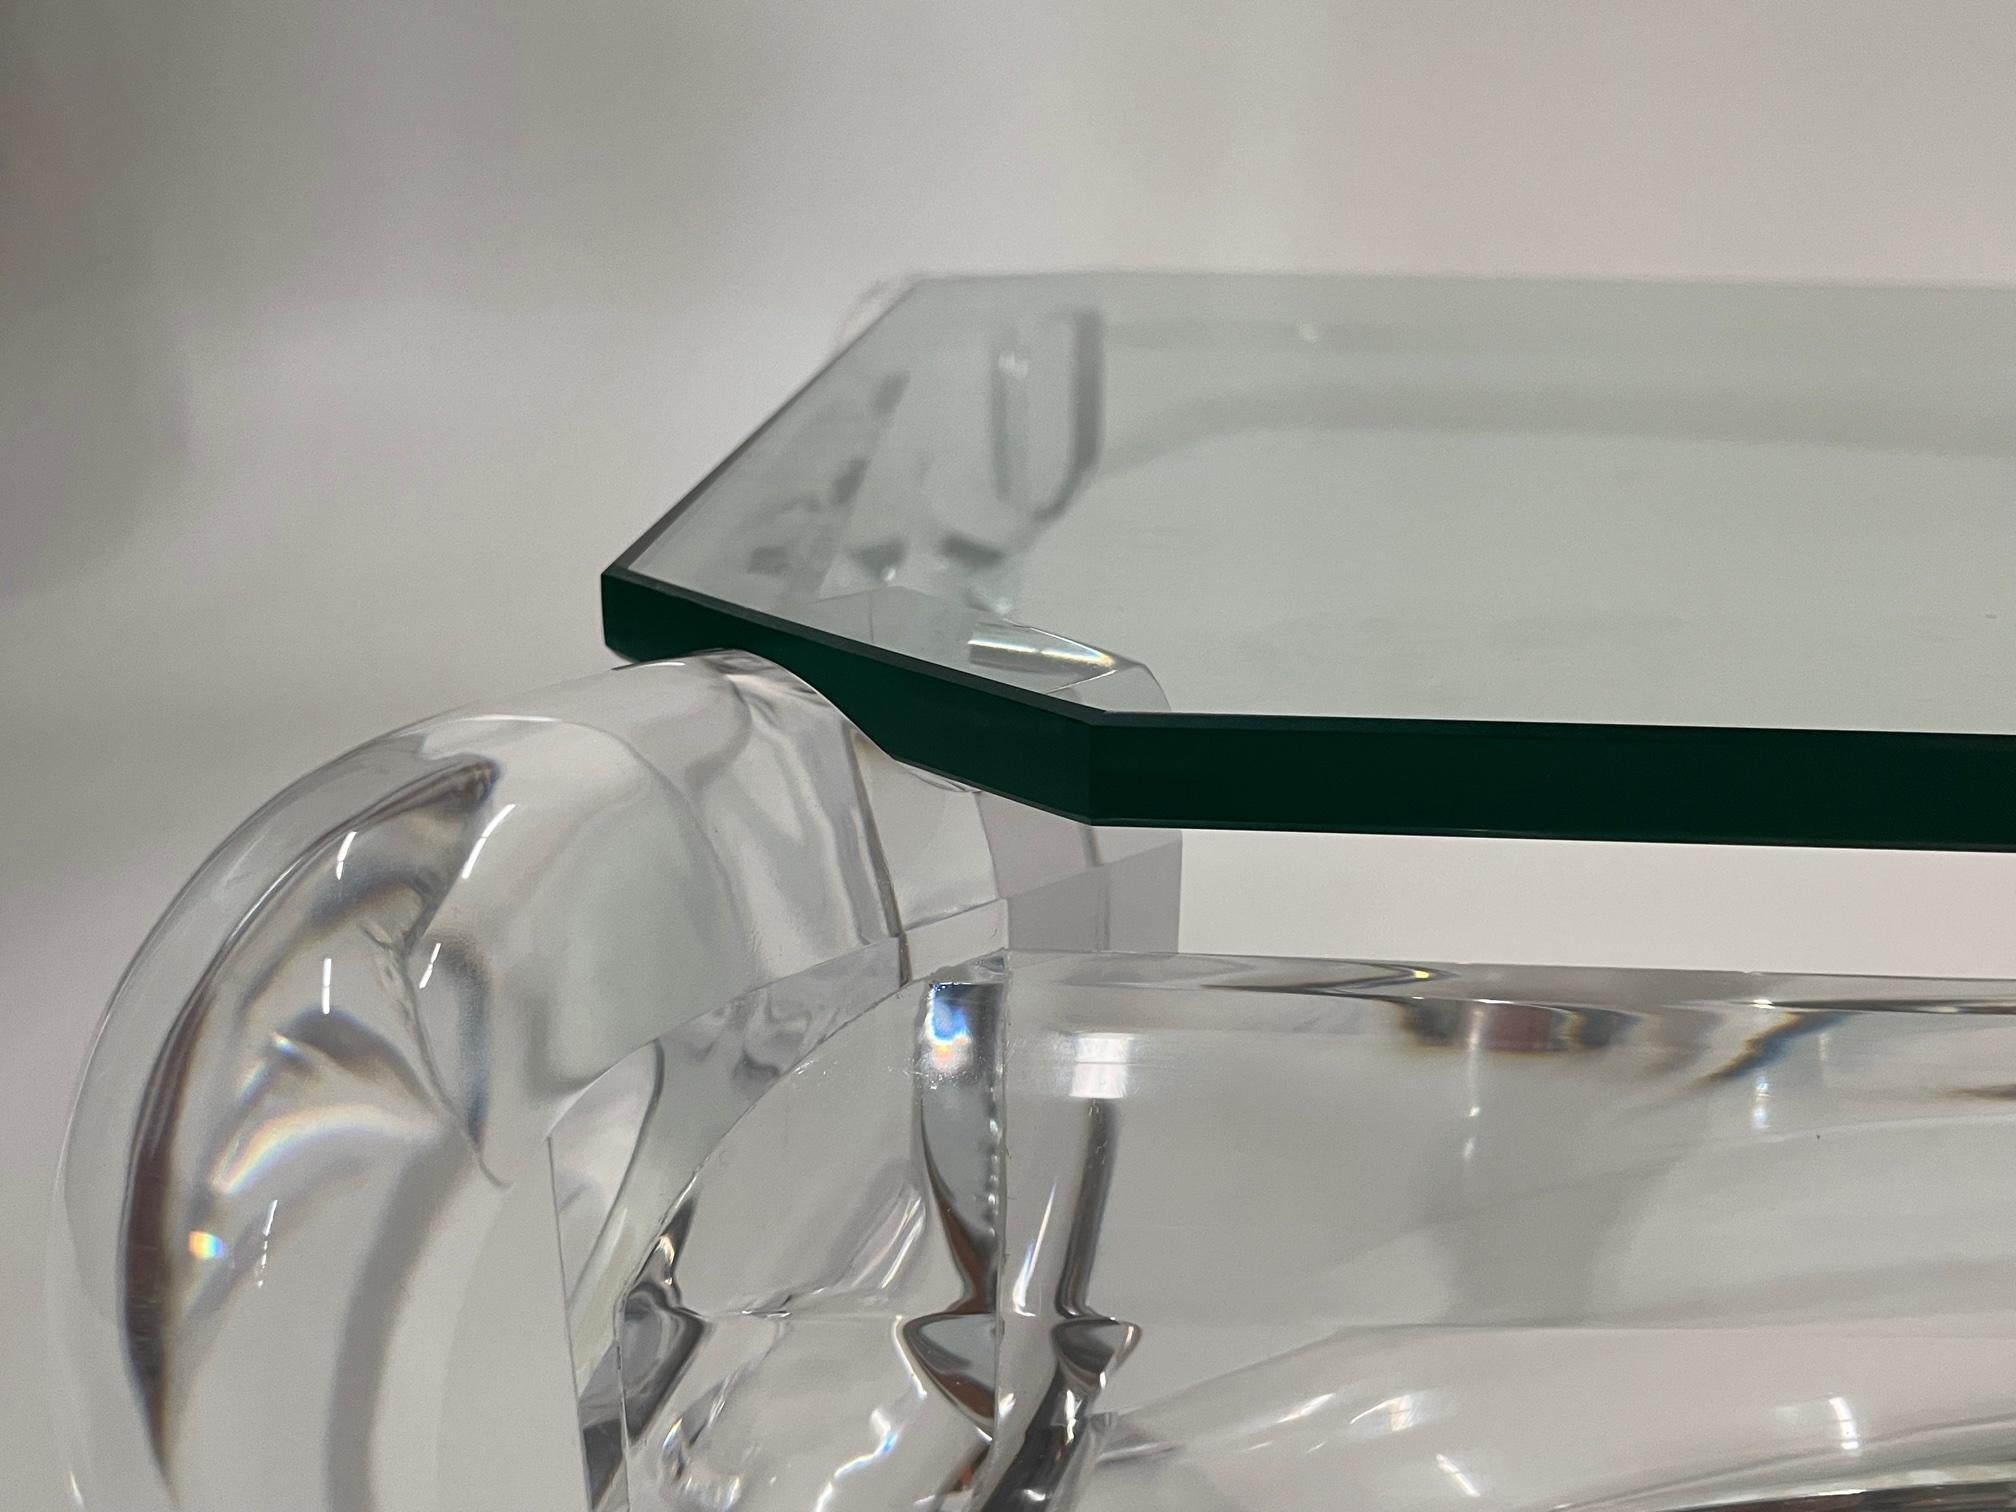 Super Hot Lucite Sculptural Mid-Century Modern Coffee Table For Sale 5